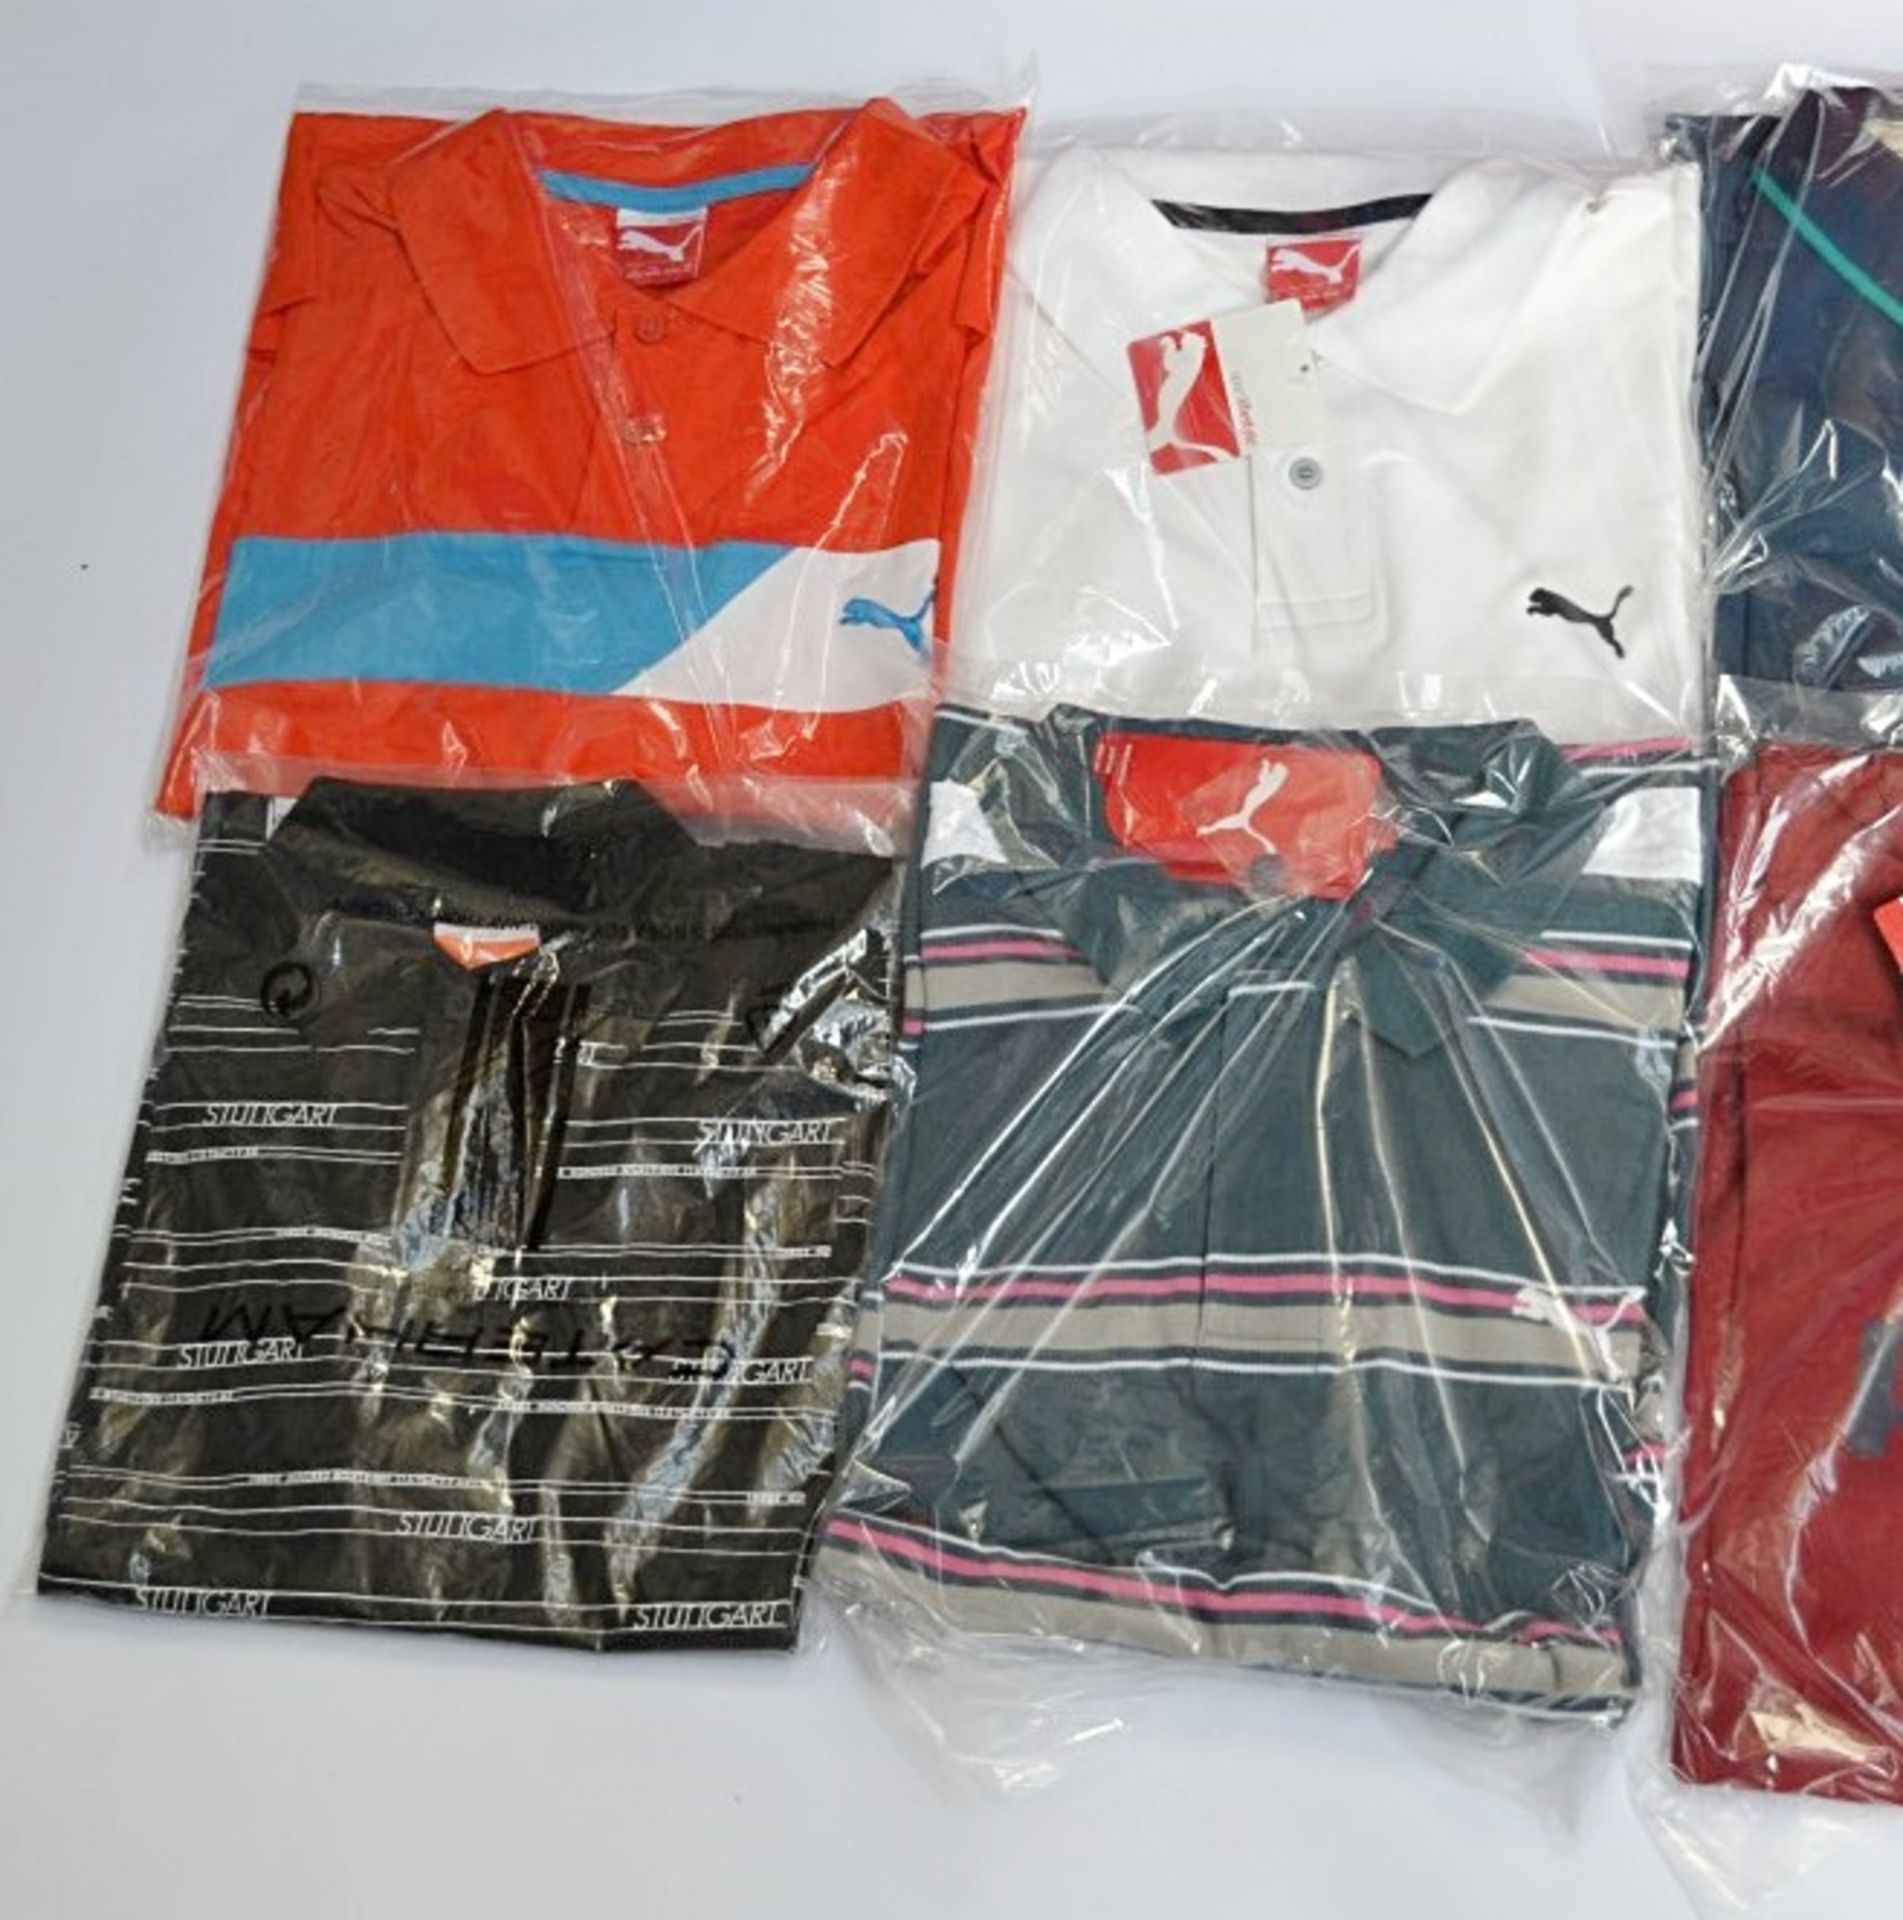 10 x Assorted PUMA Branded T-Shirts & Vests - Various Sizes: Mostly Adult Large - New With Tags - - Image 2 of 4